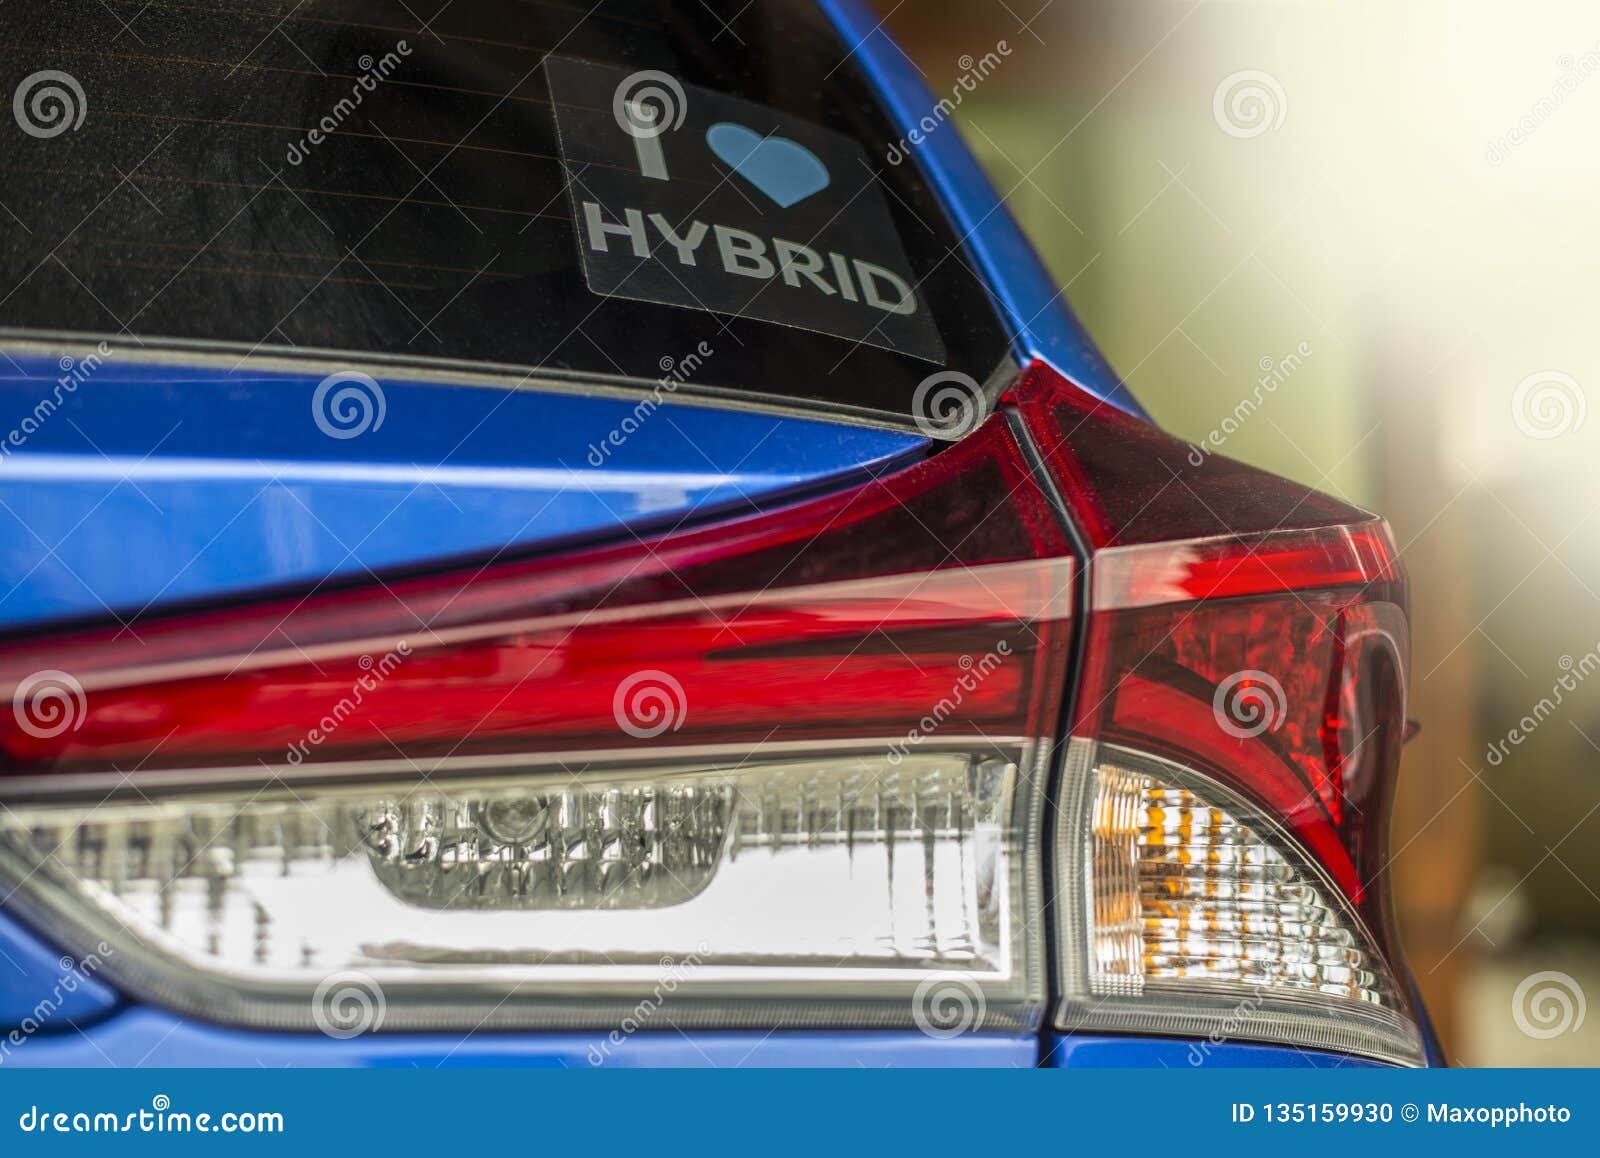 hybrid car sign. ecology vehicle safe to environment